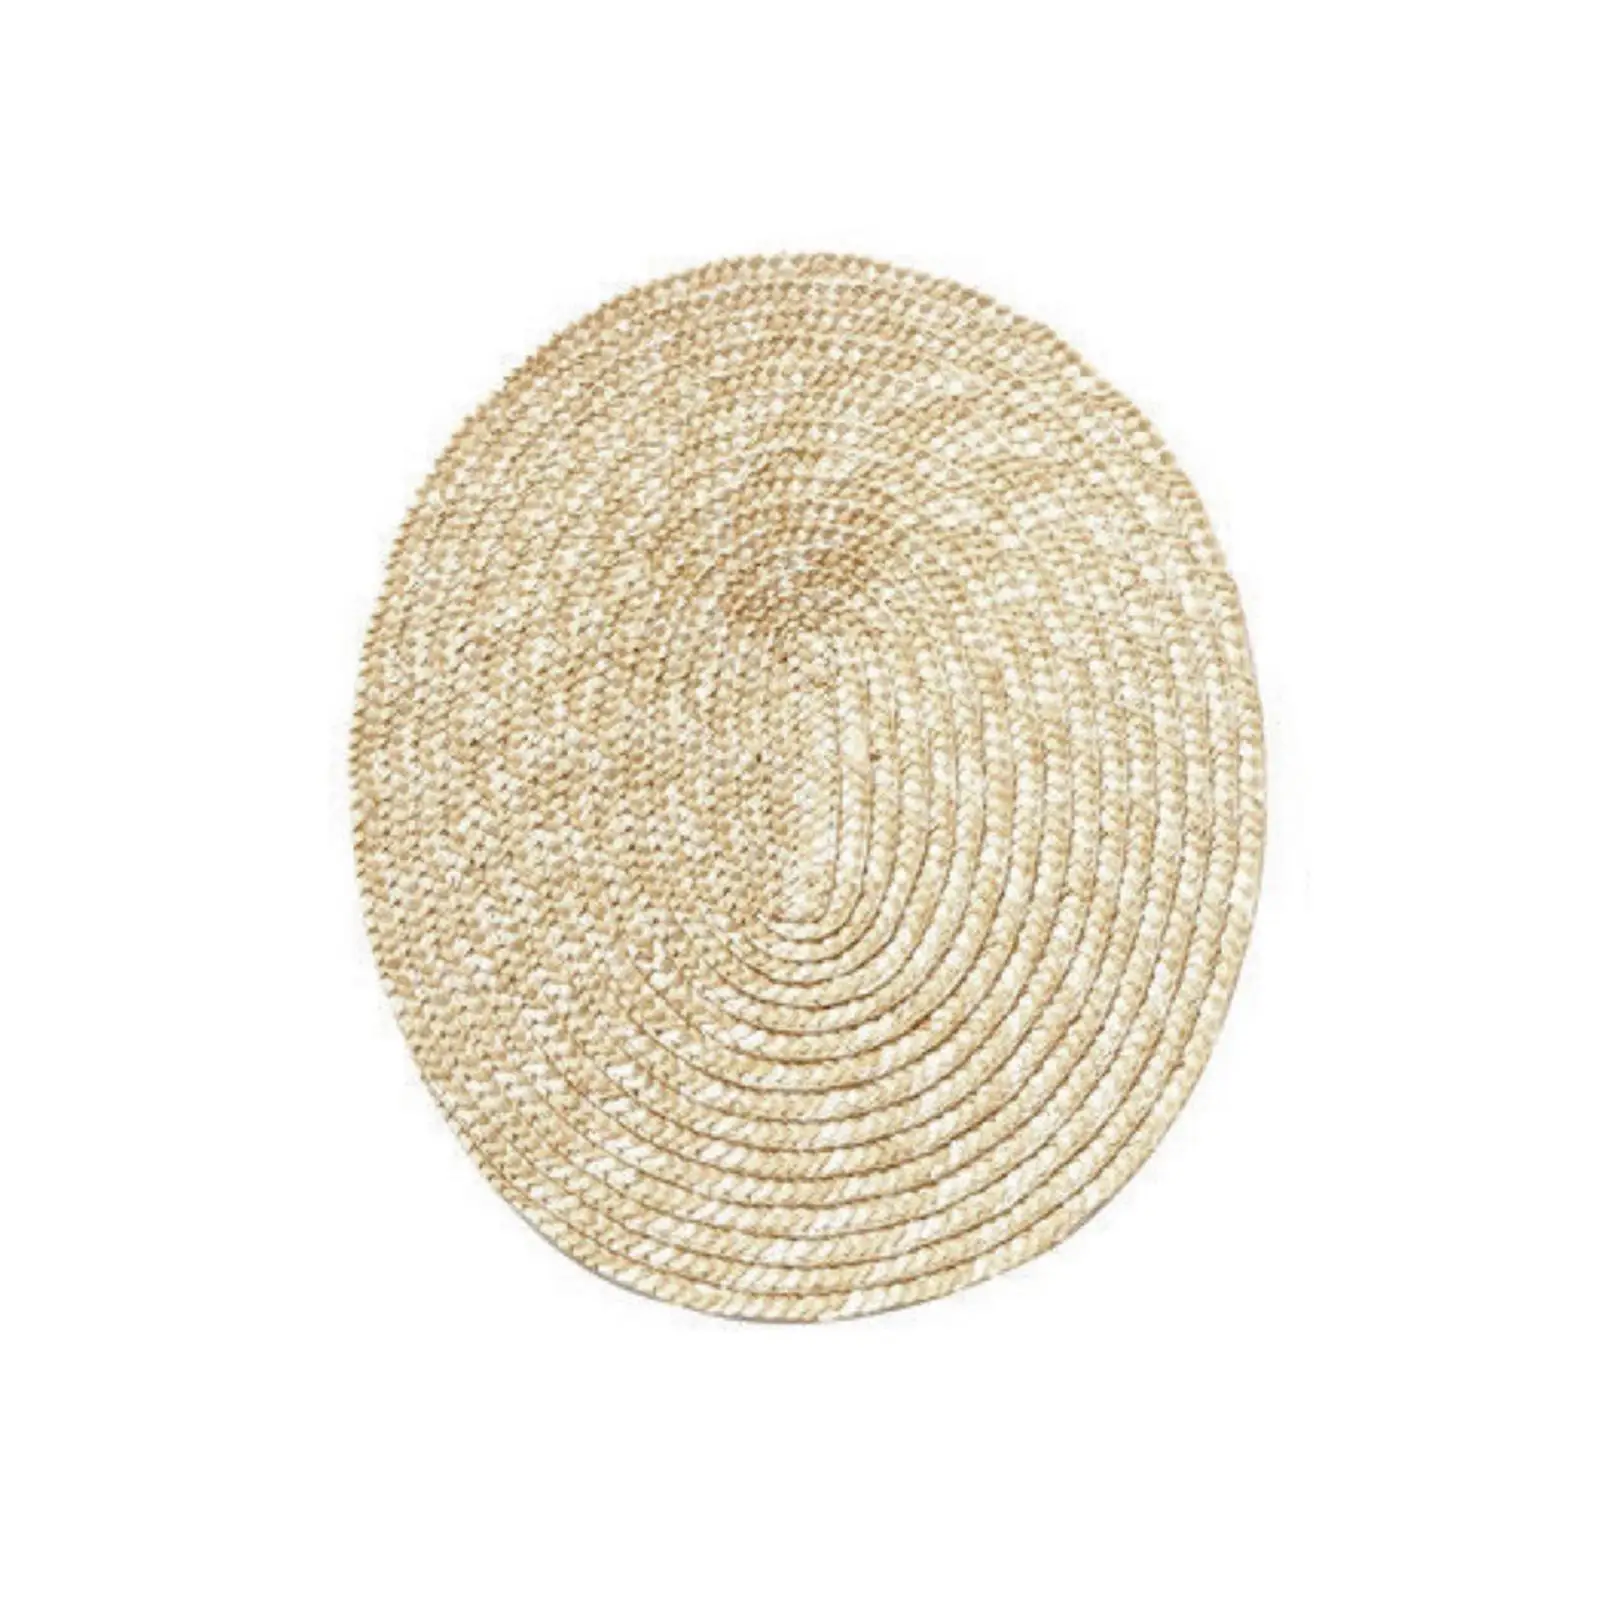 Straw Hats Braided Floppy Straw Bonnet Cap for Boater Travel Casual